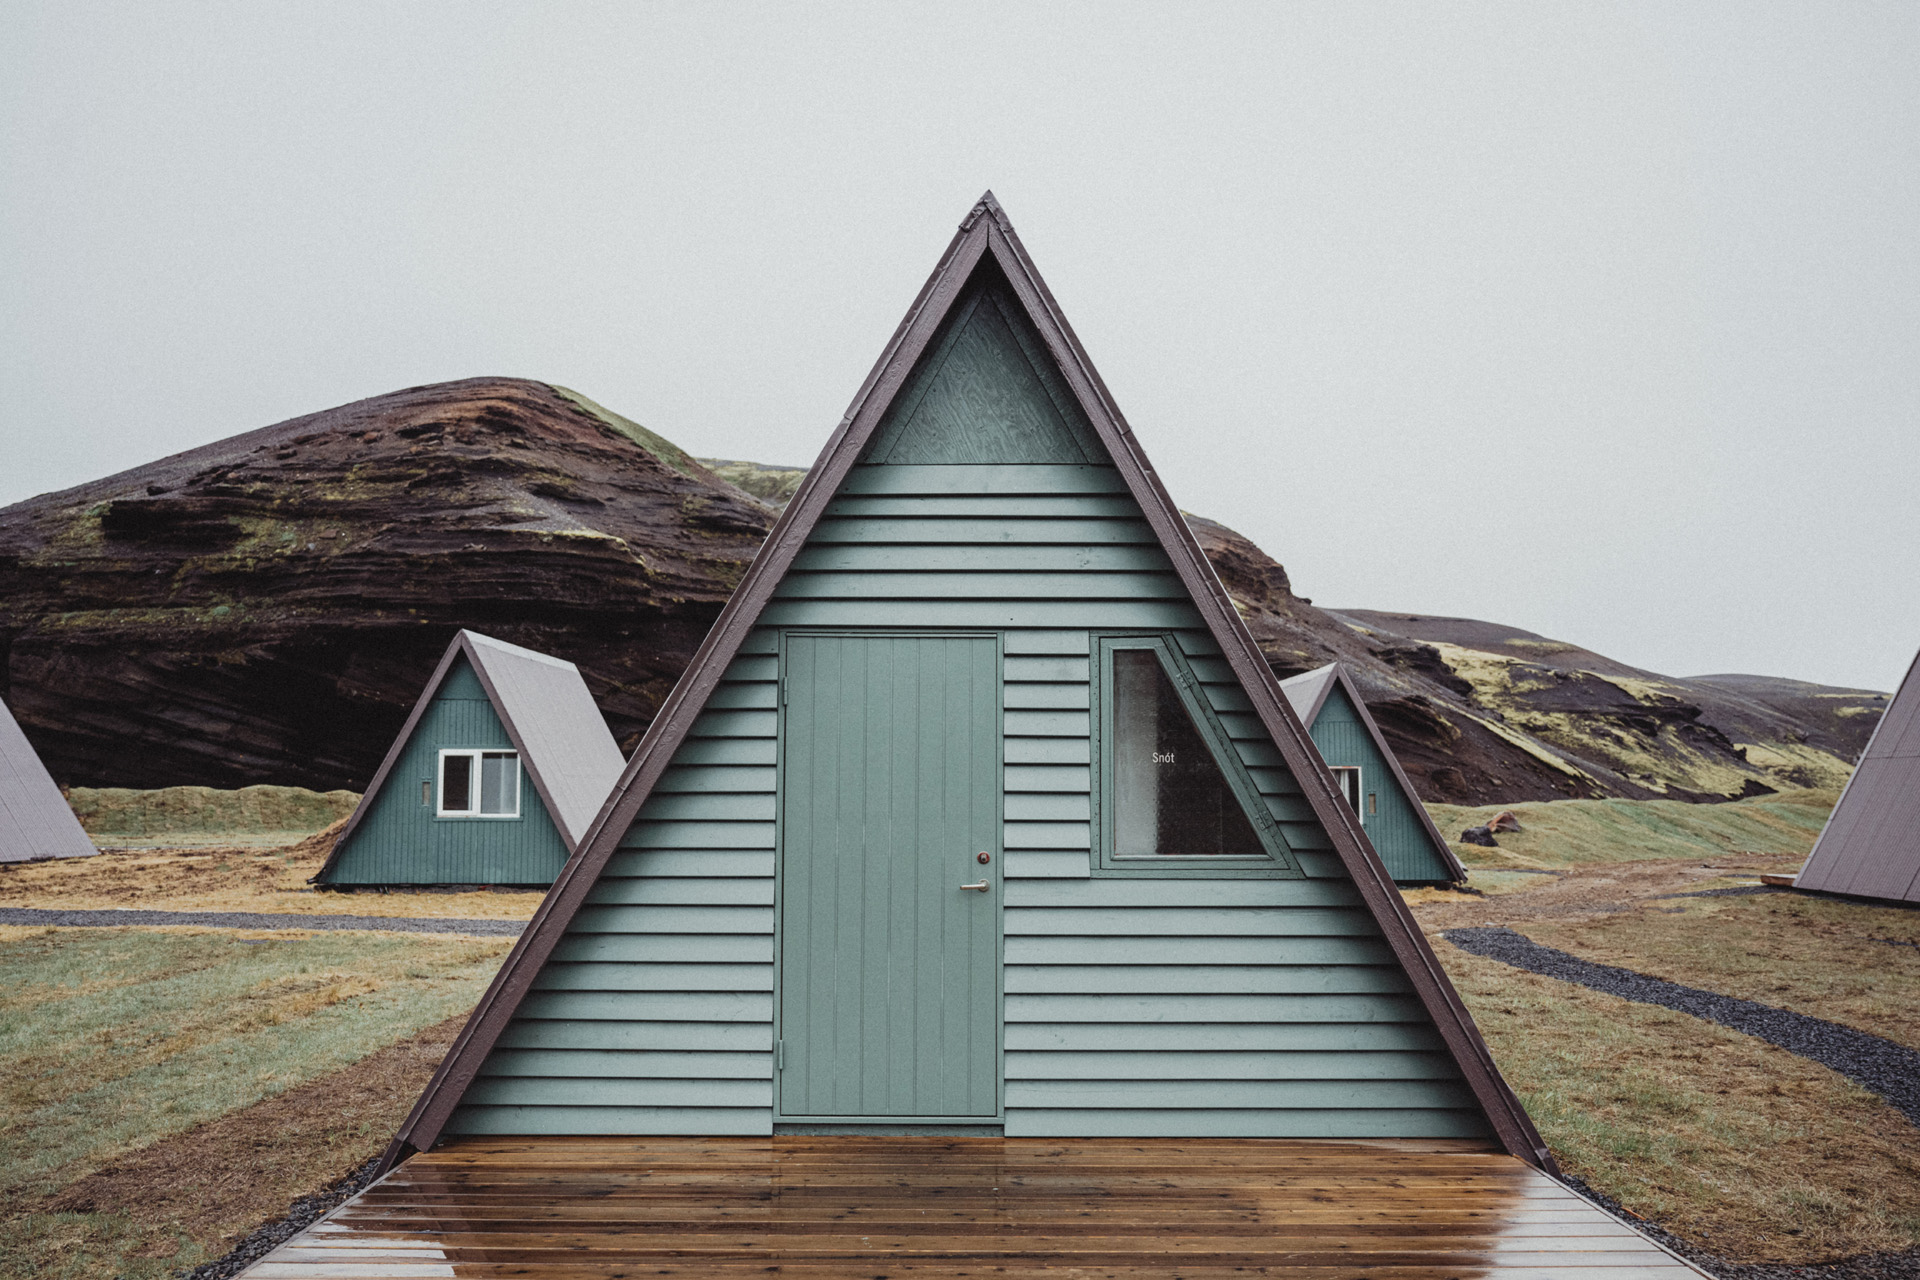 A-frame huts